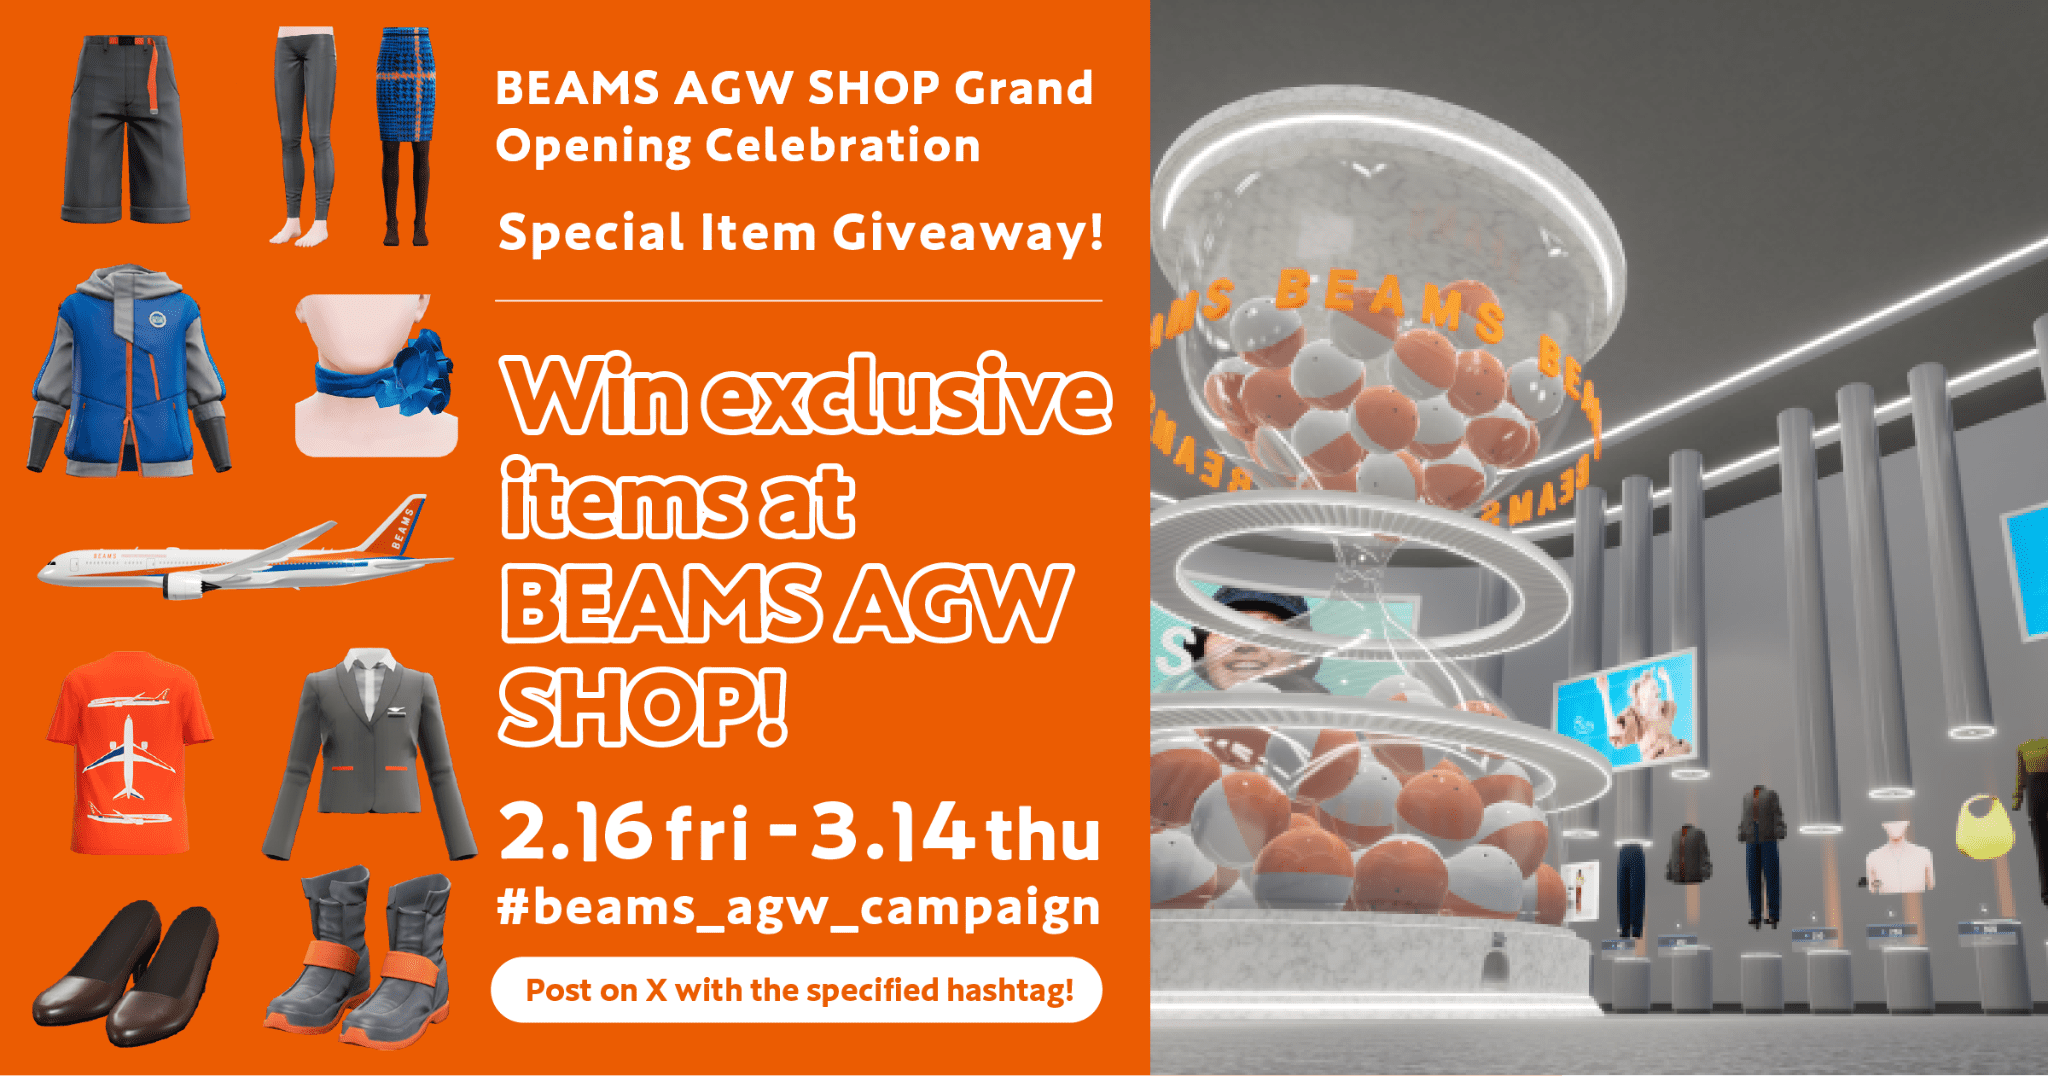 BEAMS AGW SHOP Grand Opening Celebration.Special Item Giveaway!Get a chance to win exclusive items from BEAMS AGW SHOP!2.16 (Fri) - 3.14 (Thu).'#beams_agw_giveaway' Post on X with the specified hashtag!